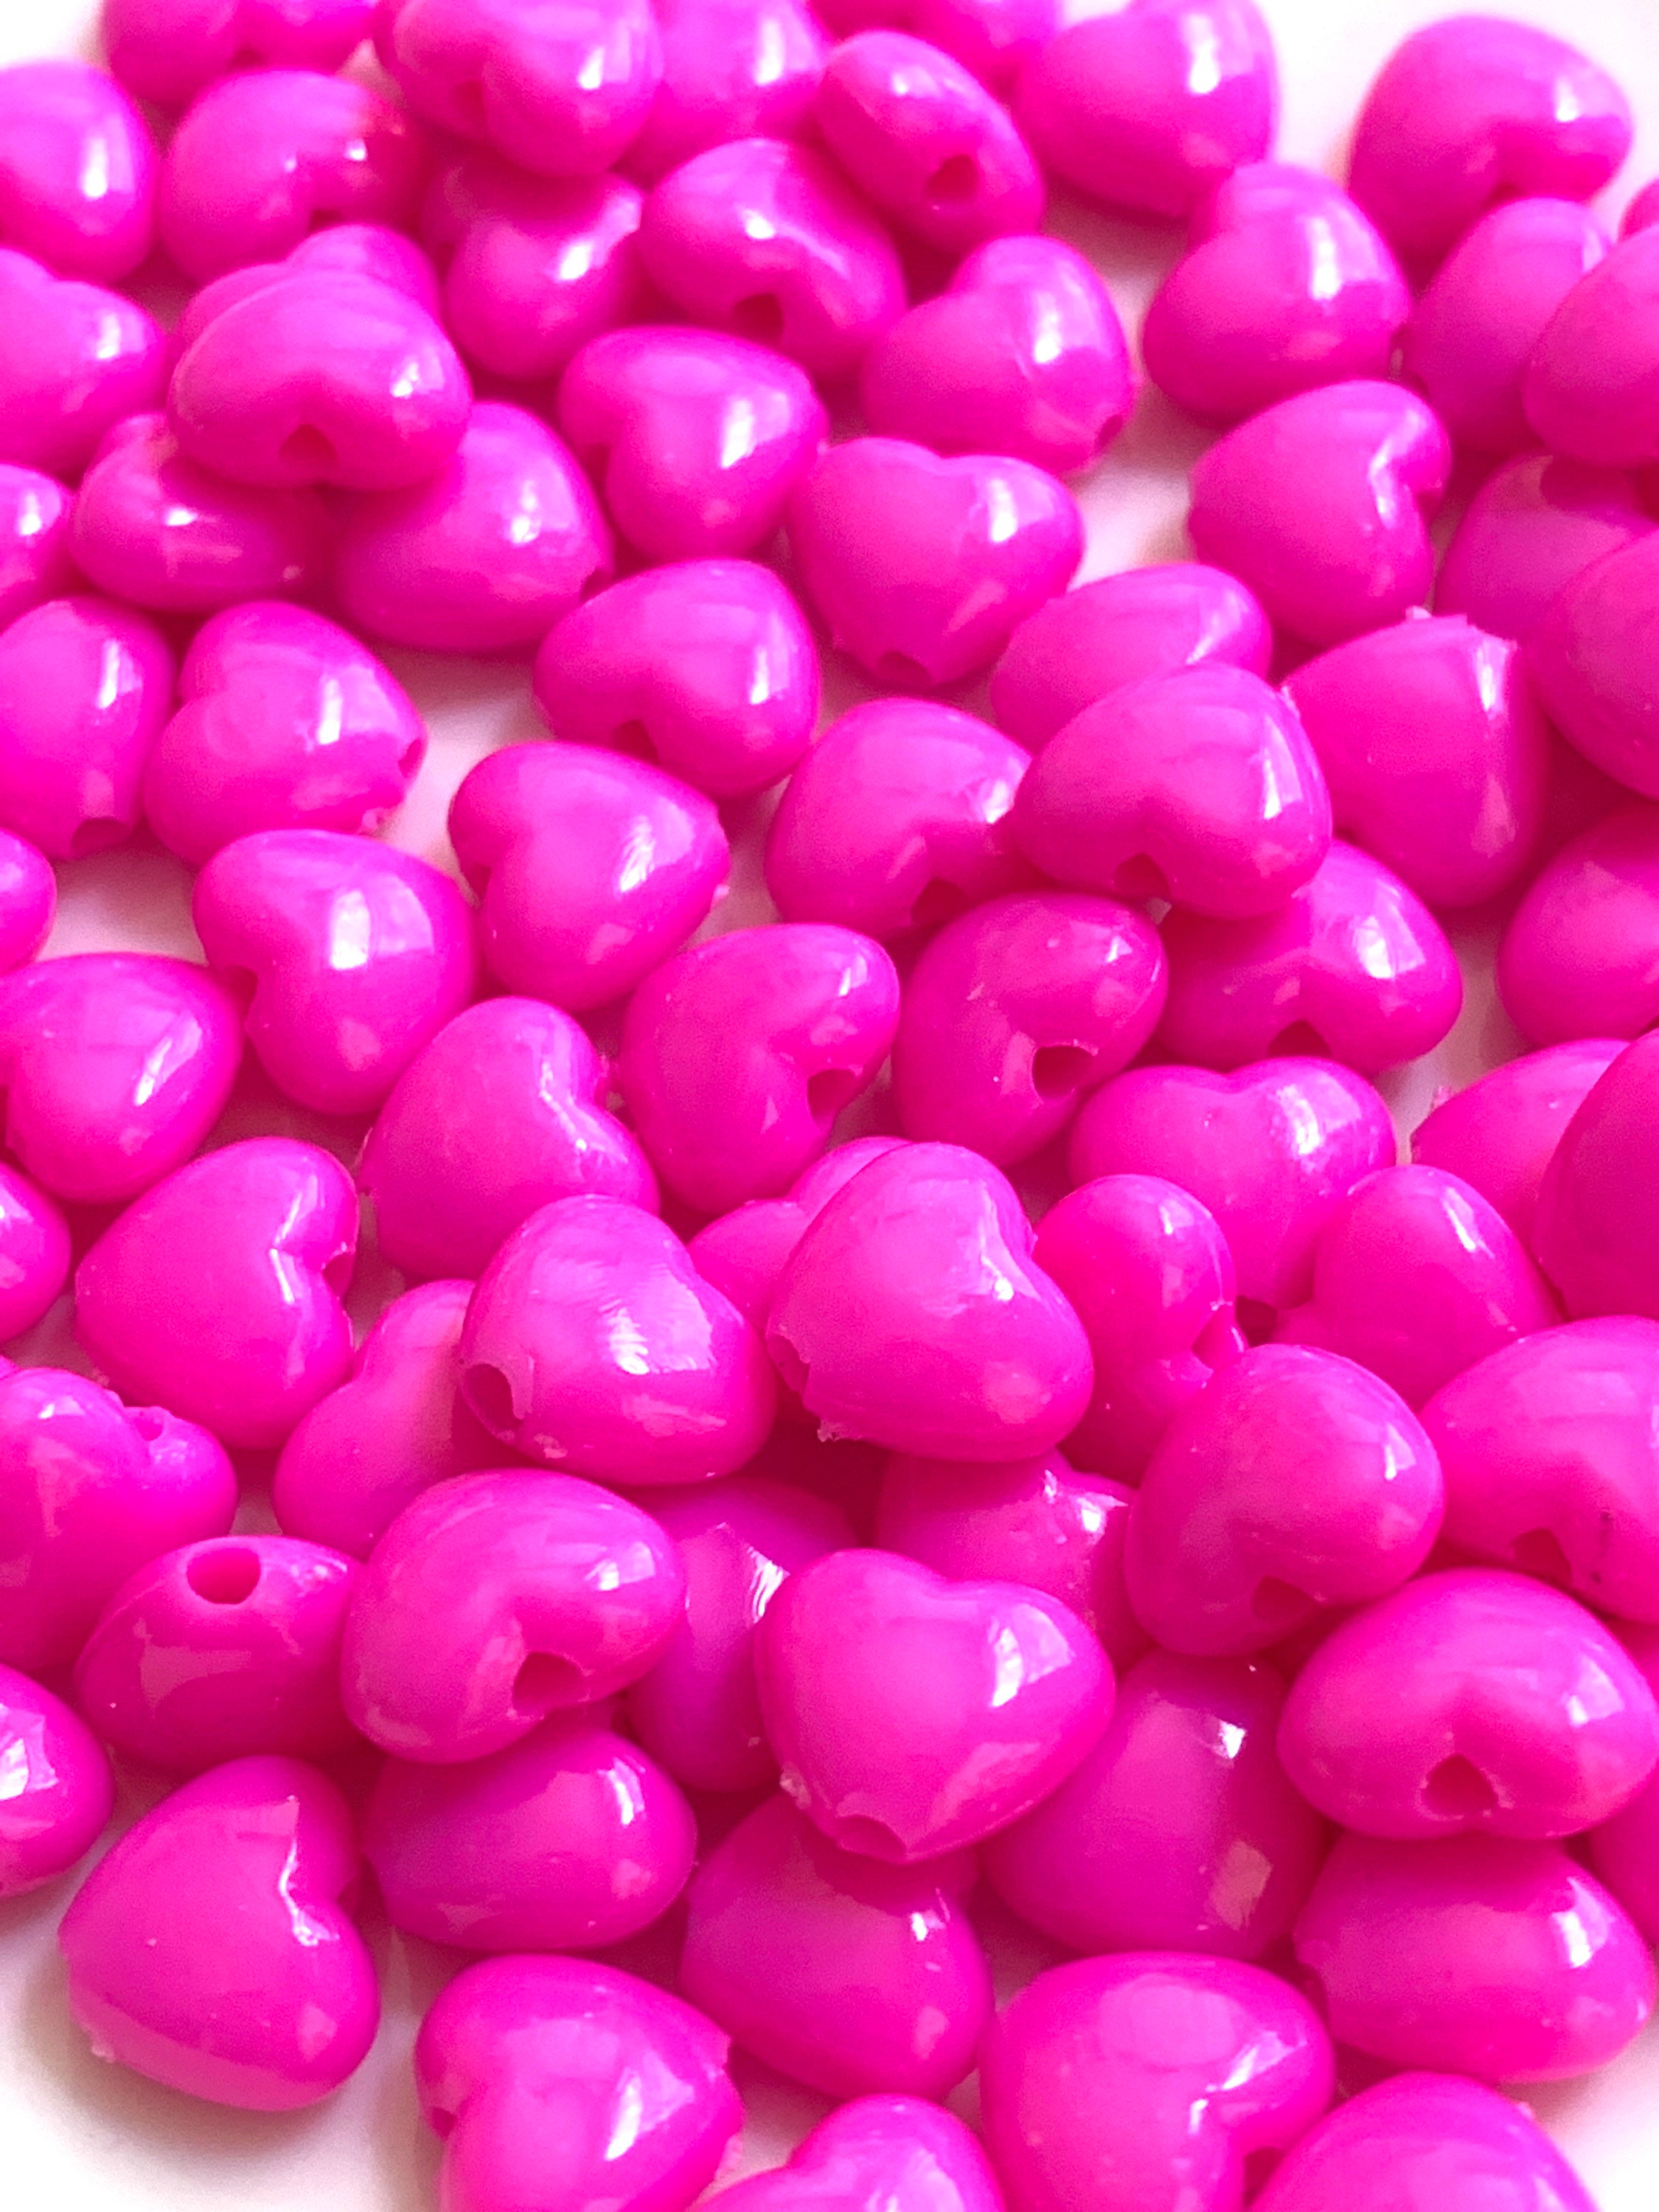 Magenta Pink Heart Candy Necklace Beads, Acrylic Beads 100 Pc Set